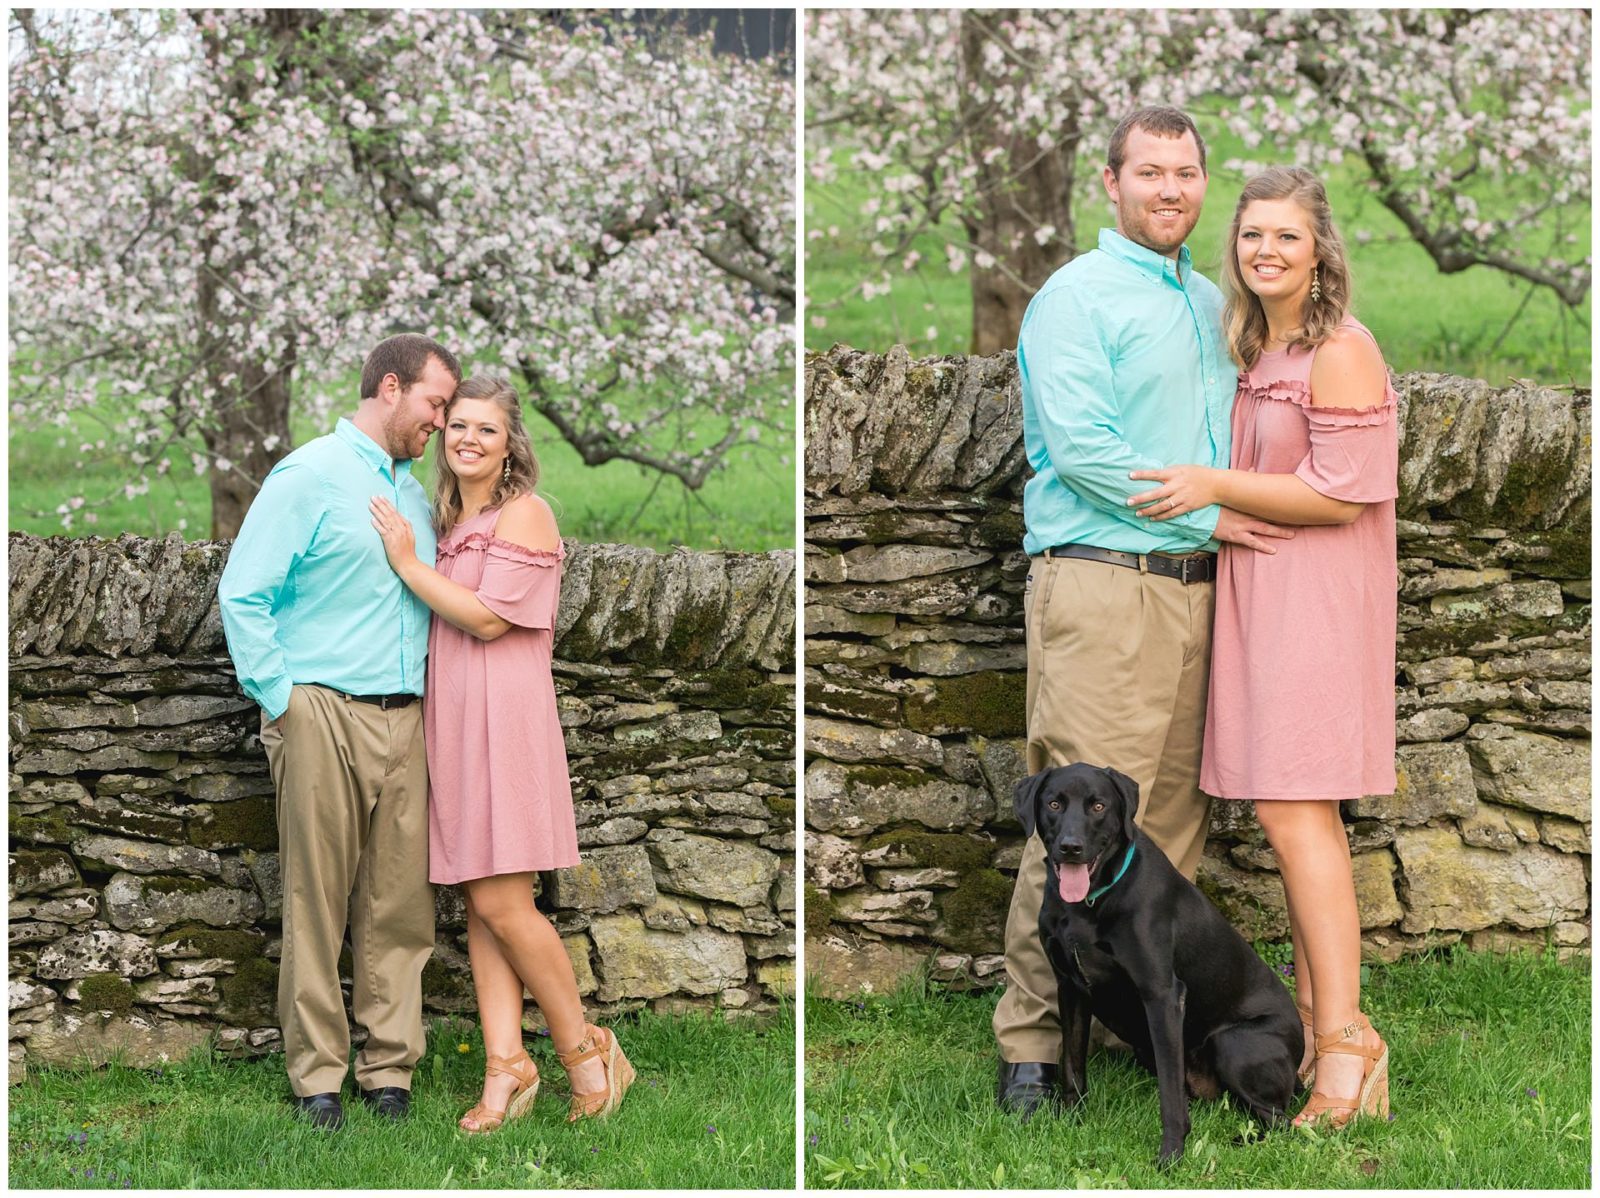 Dog Spring Engagement Session with flowering trees at Shaker Village in Harrodsburg, Kentucky.